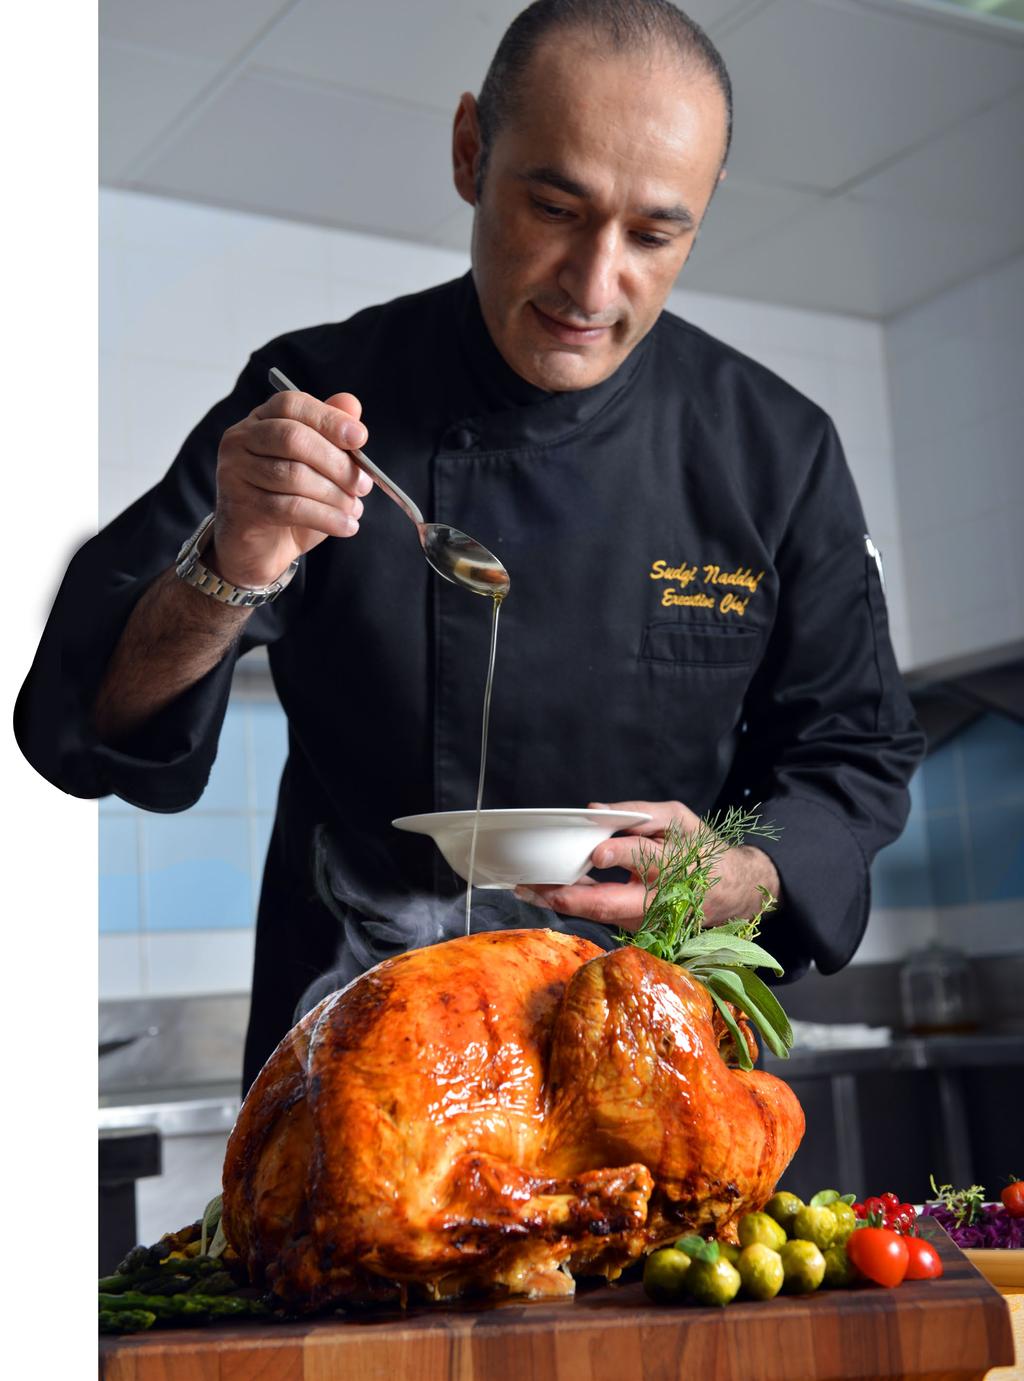 Executive Chef Sudqi Naddaf From our Kitchen to Your table by